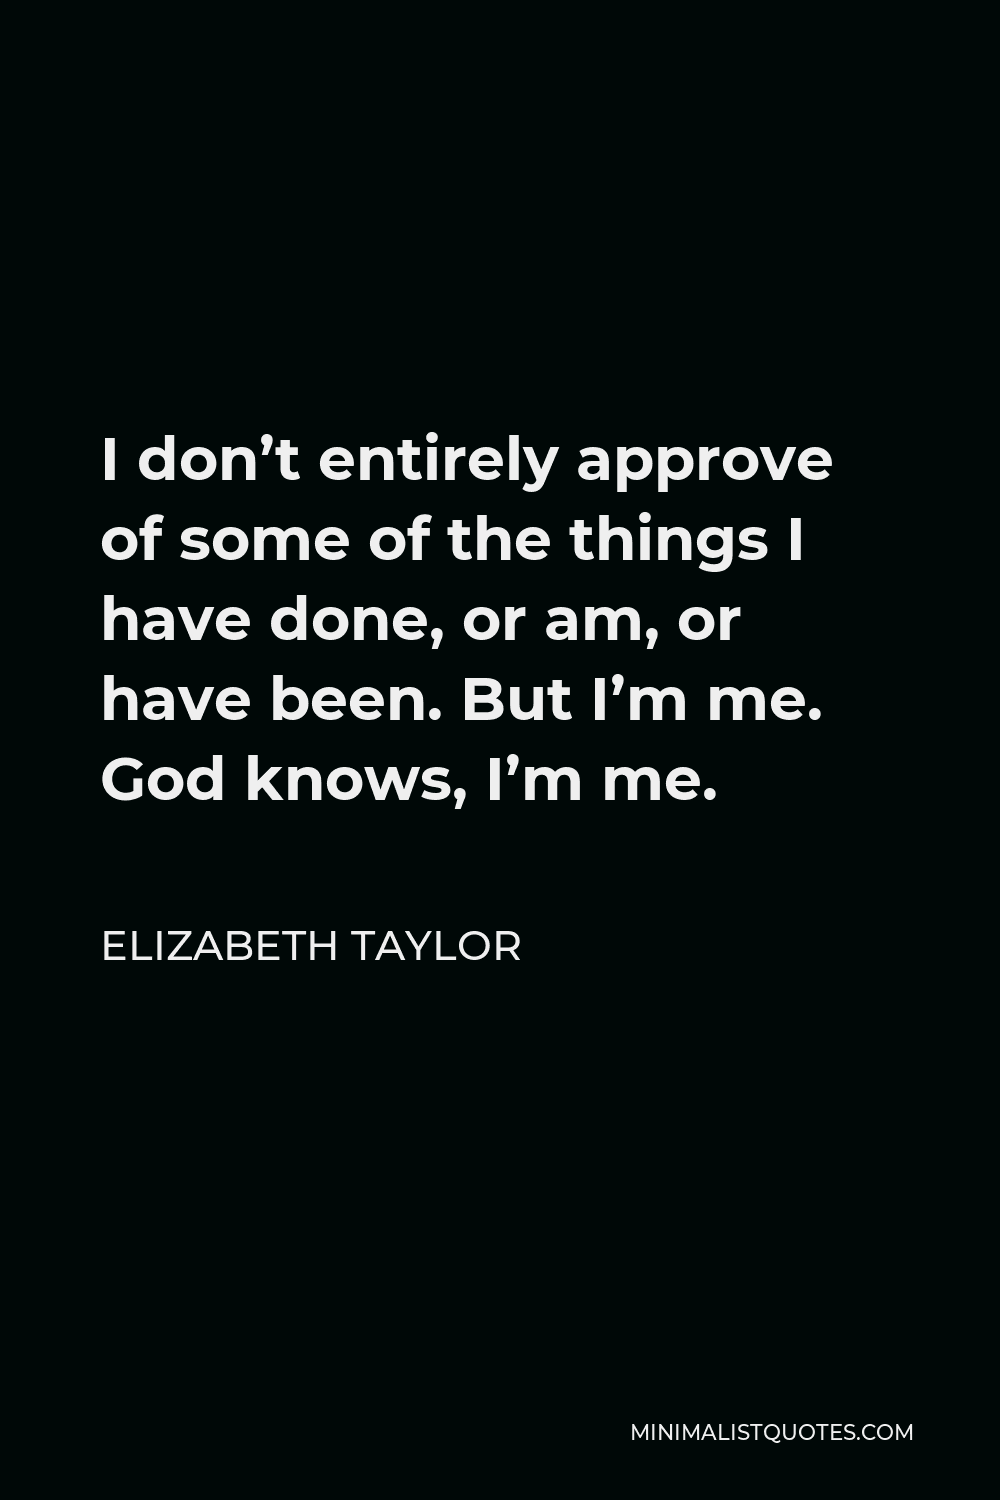 Elizabeth Taylor Quote - I don’t entirely approve of some of the things I have done, or am, or have been. But I’m me. God knows, I’m me.